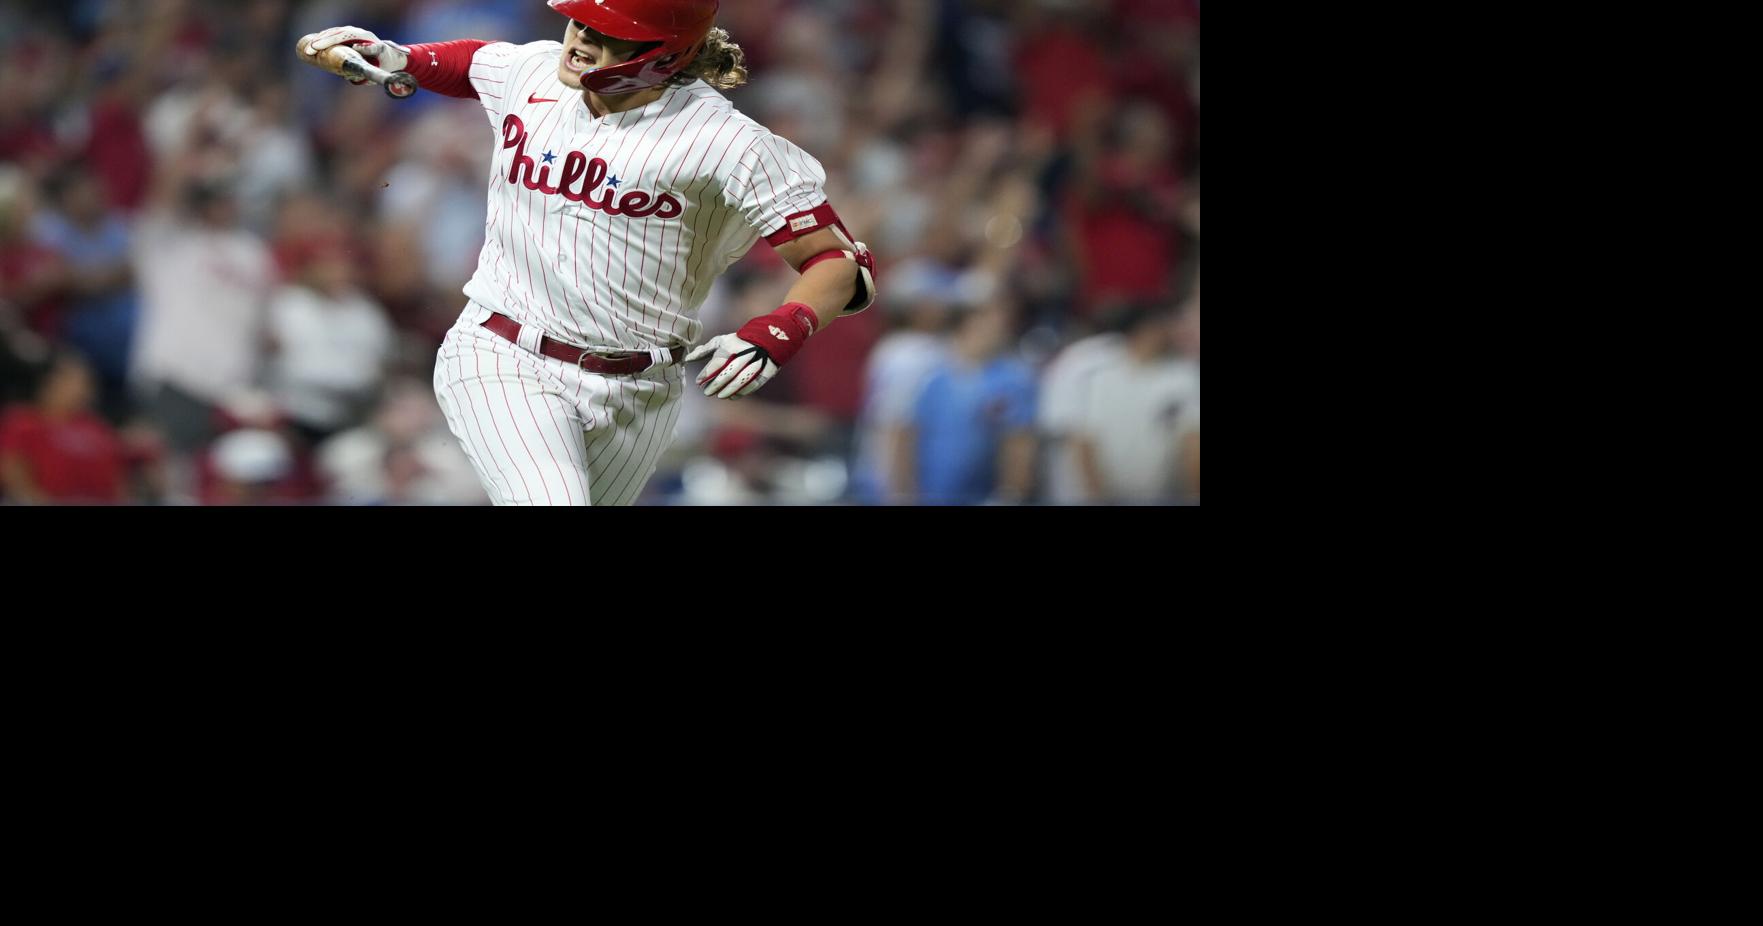 Philadelphia Phillies Alec Bohm homers in the second inning